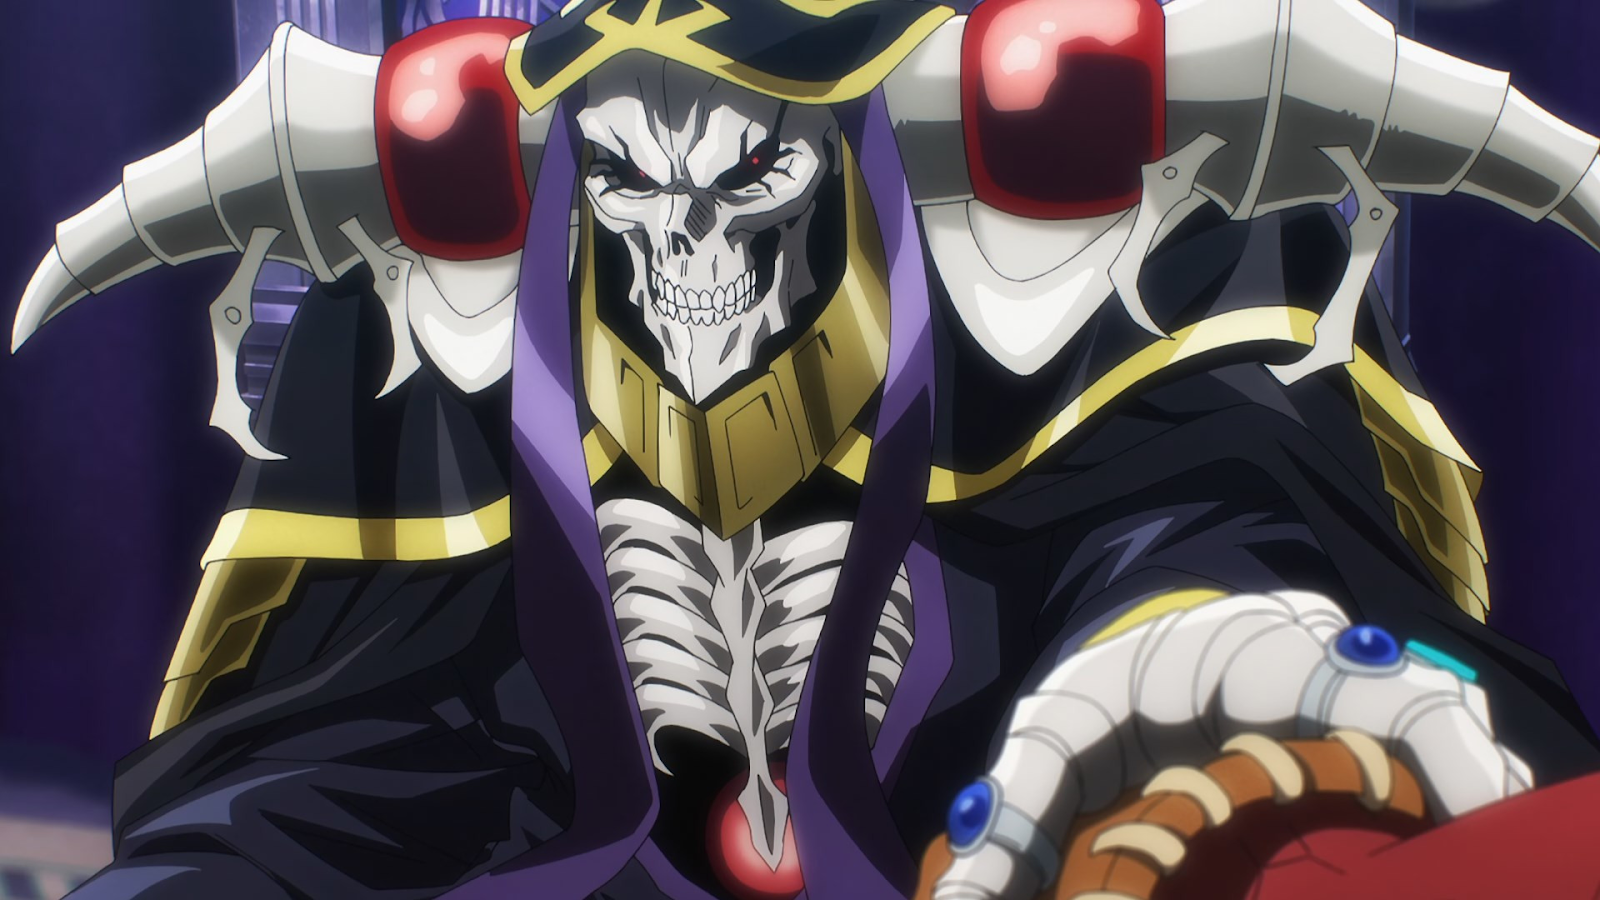 Ainz Ooal Gown popular anime characters